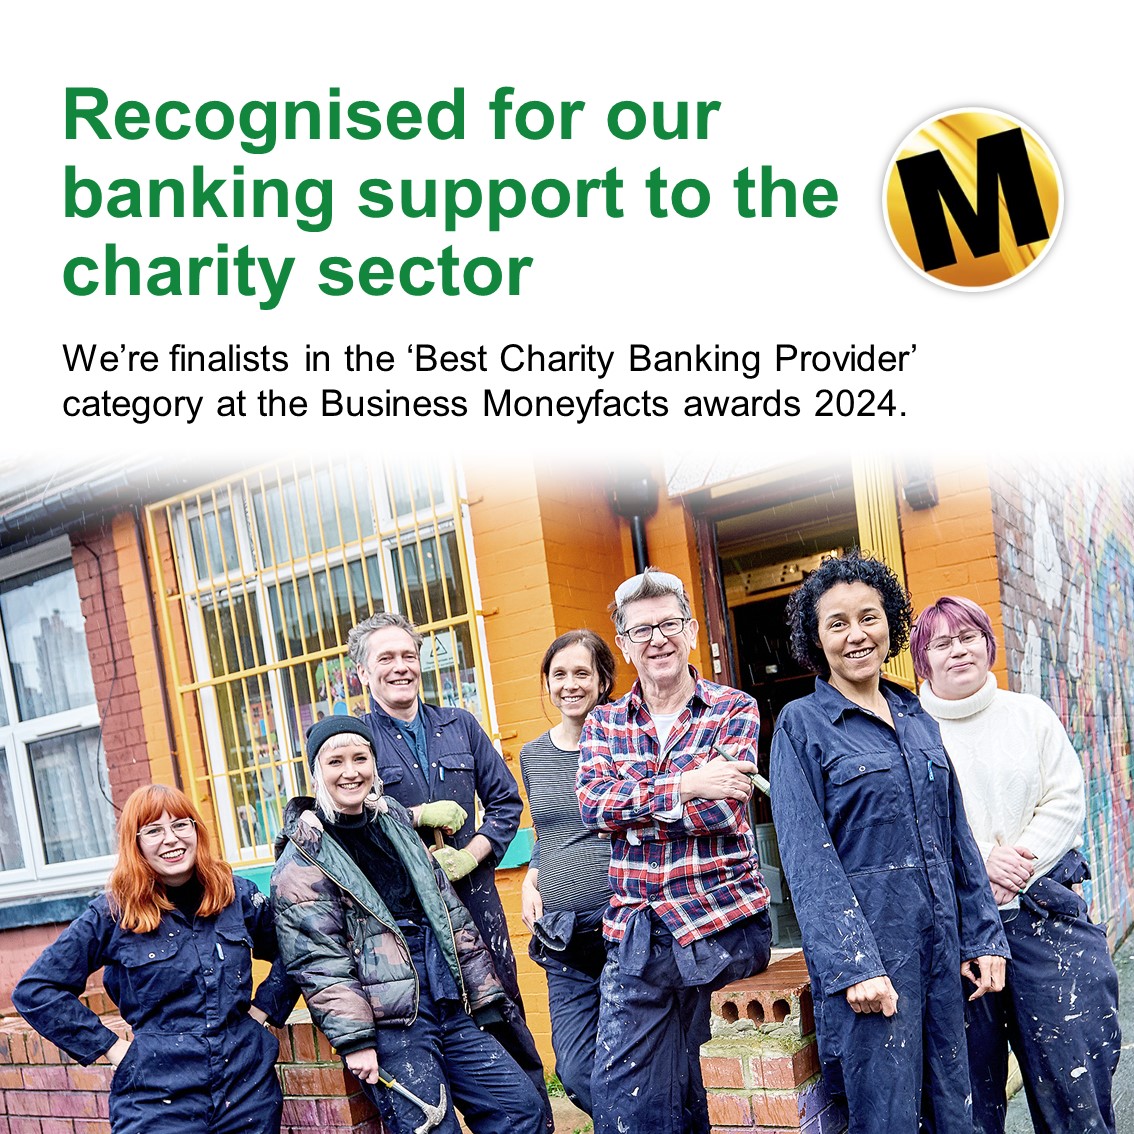 1 month to go until the @FinanceAwards - and we're in the running for Best Charity Banking Provider. 🏆 For 40 years, we've provided business banking solutions to like-minded organisations, including charities, that share our values. Learn more: bit.ly/3H9GfB4